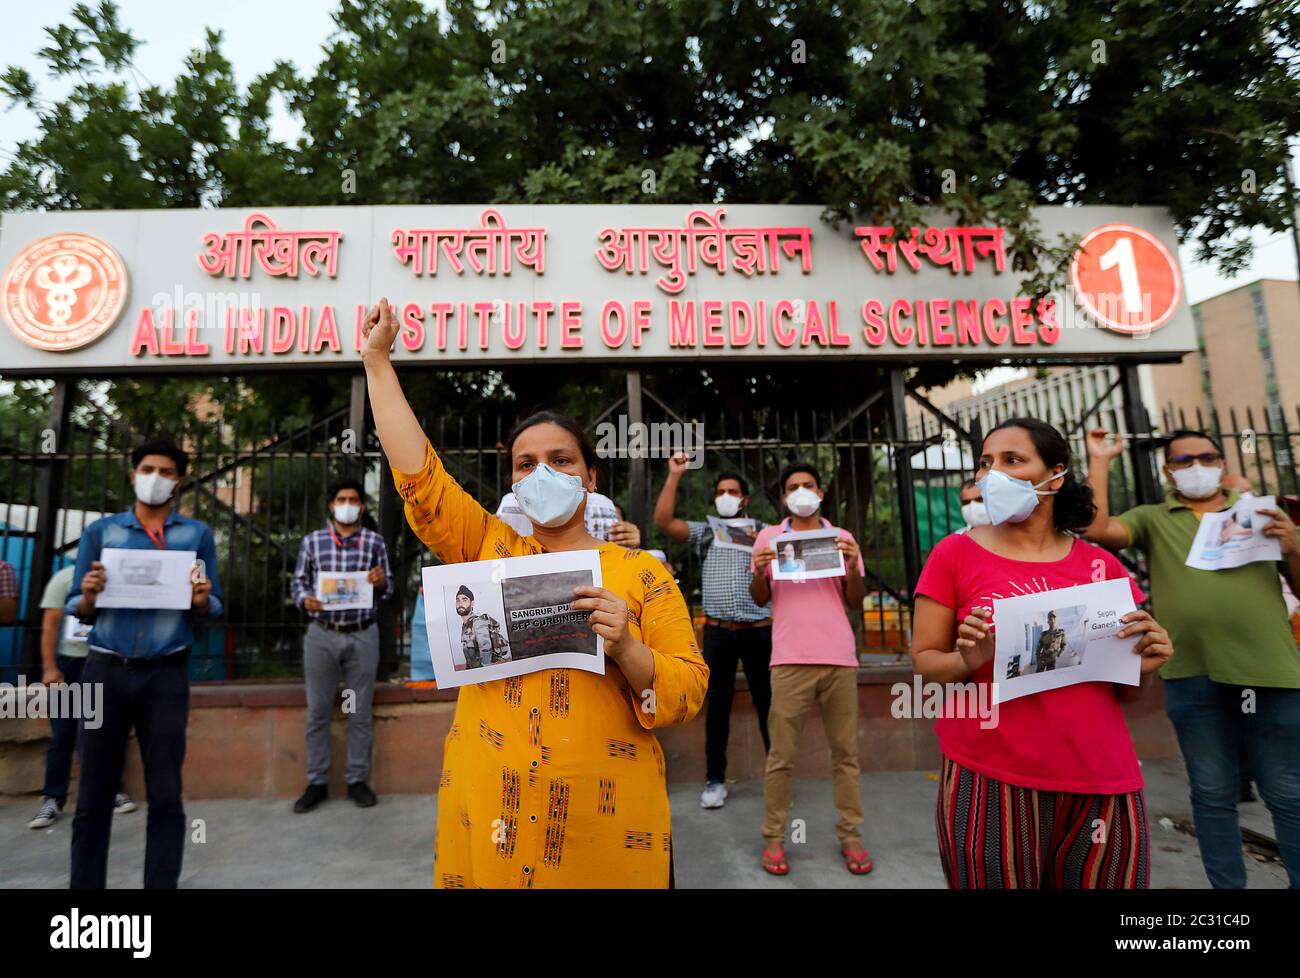 Doctors of All India Institute of Medical Science (AIIMS) gesture hold placards as they pay a tribute to the soldiers who lost their lives following recent clashes between India and China during an anti-China demonstration outside AIIMS hospital in New Delhi. According to Indian media reports, twenty Indian Army personnel, including a colonel were killed during the clashes with Chinese troops in the eastern Ladakh region. Stock Photo